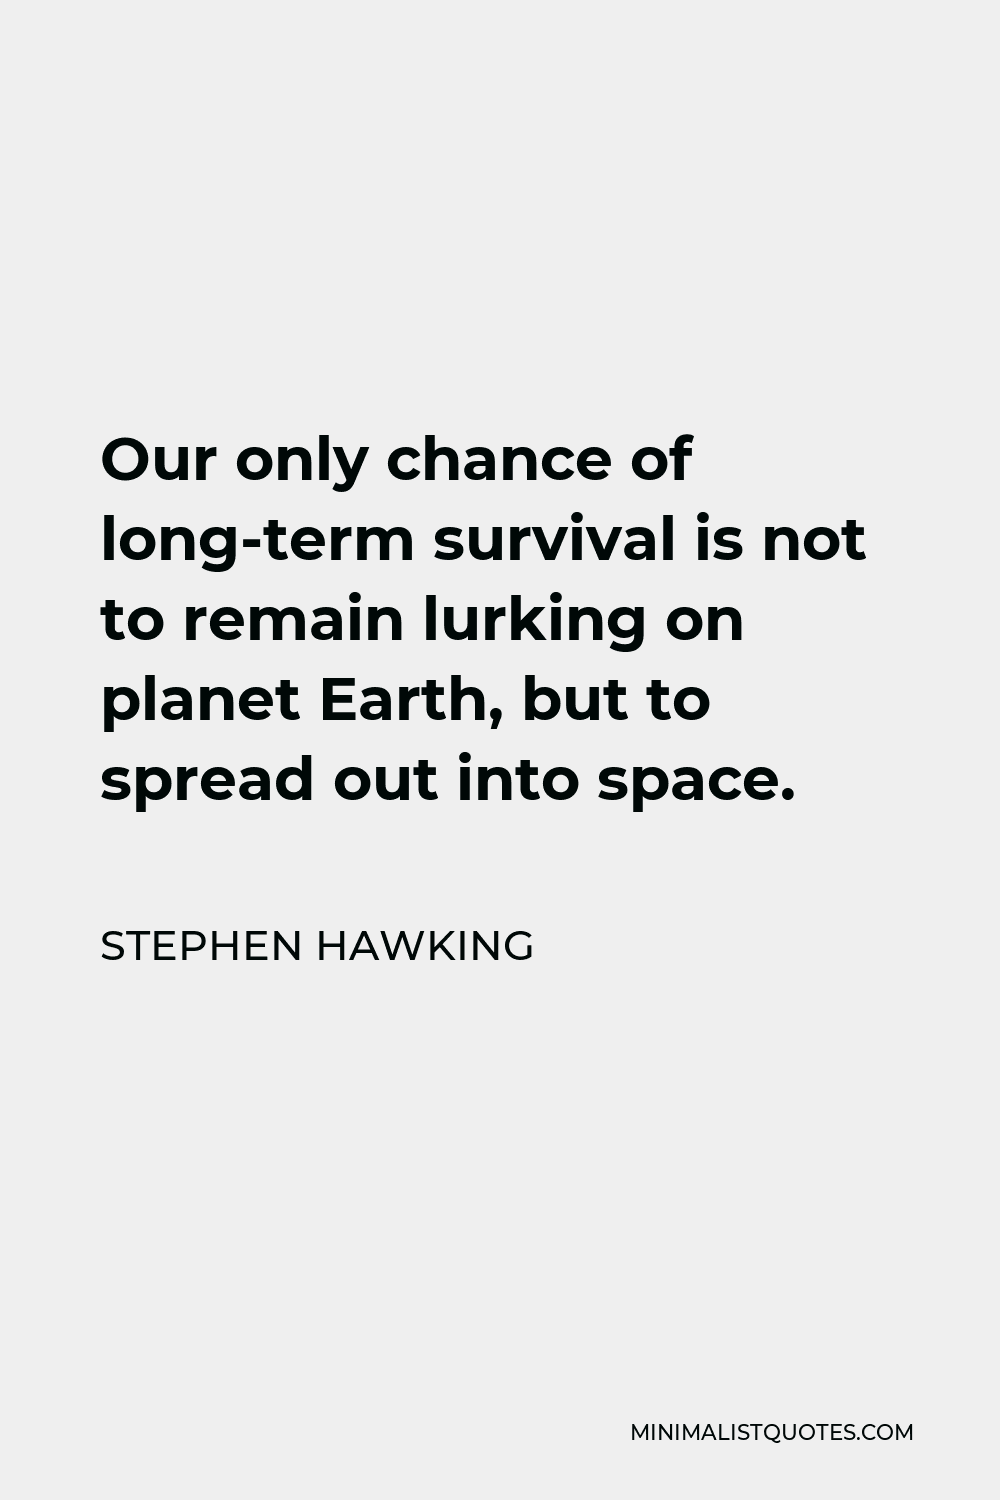 Stephen Hawking Quote - Our only chance of long-term survival is not to remain lurking on planet Earth, but to spread out into space.